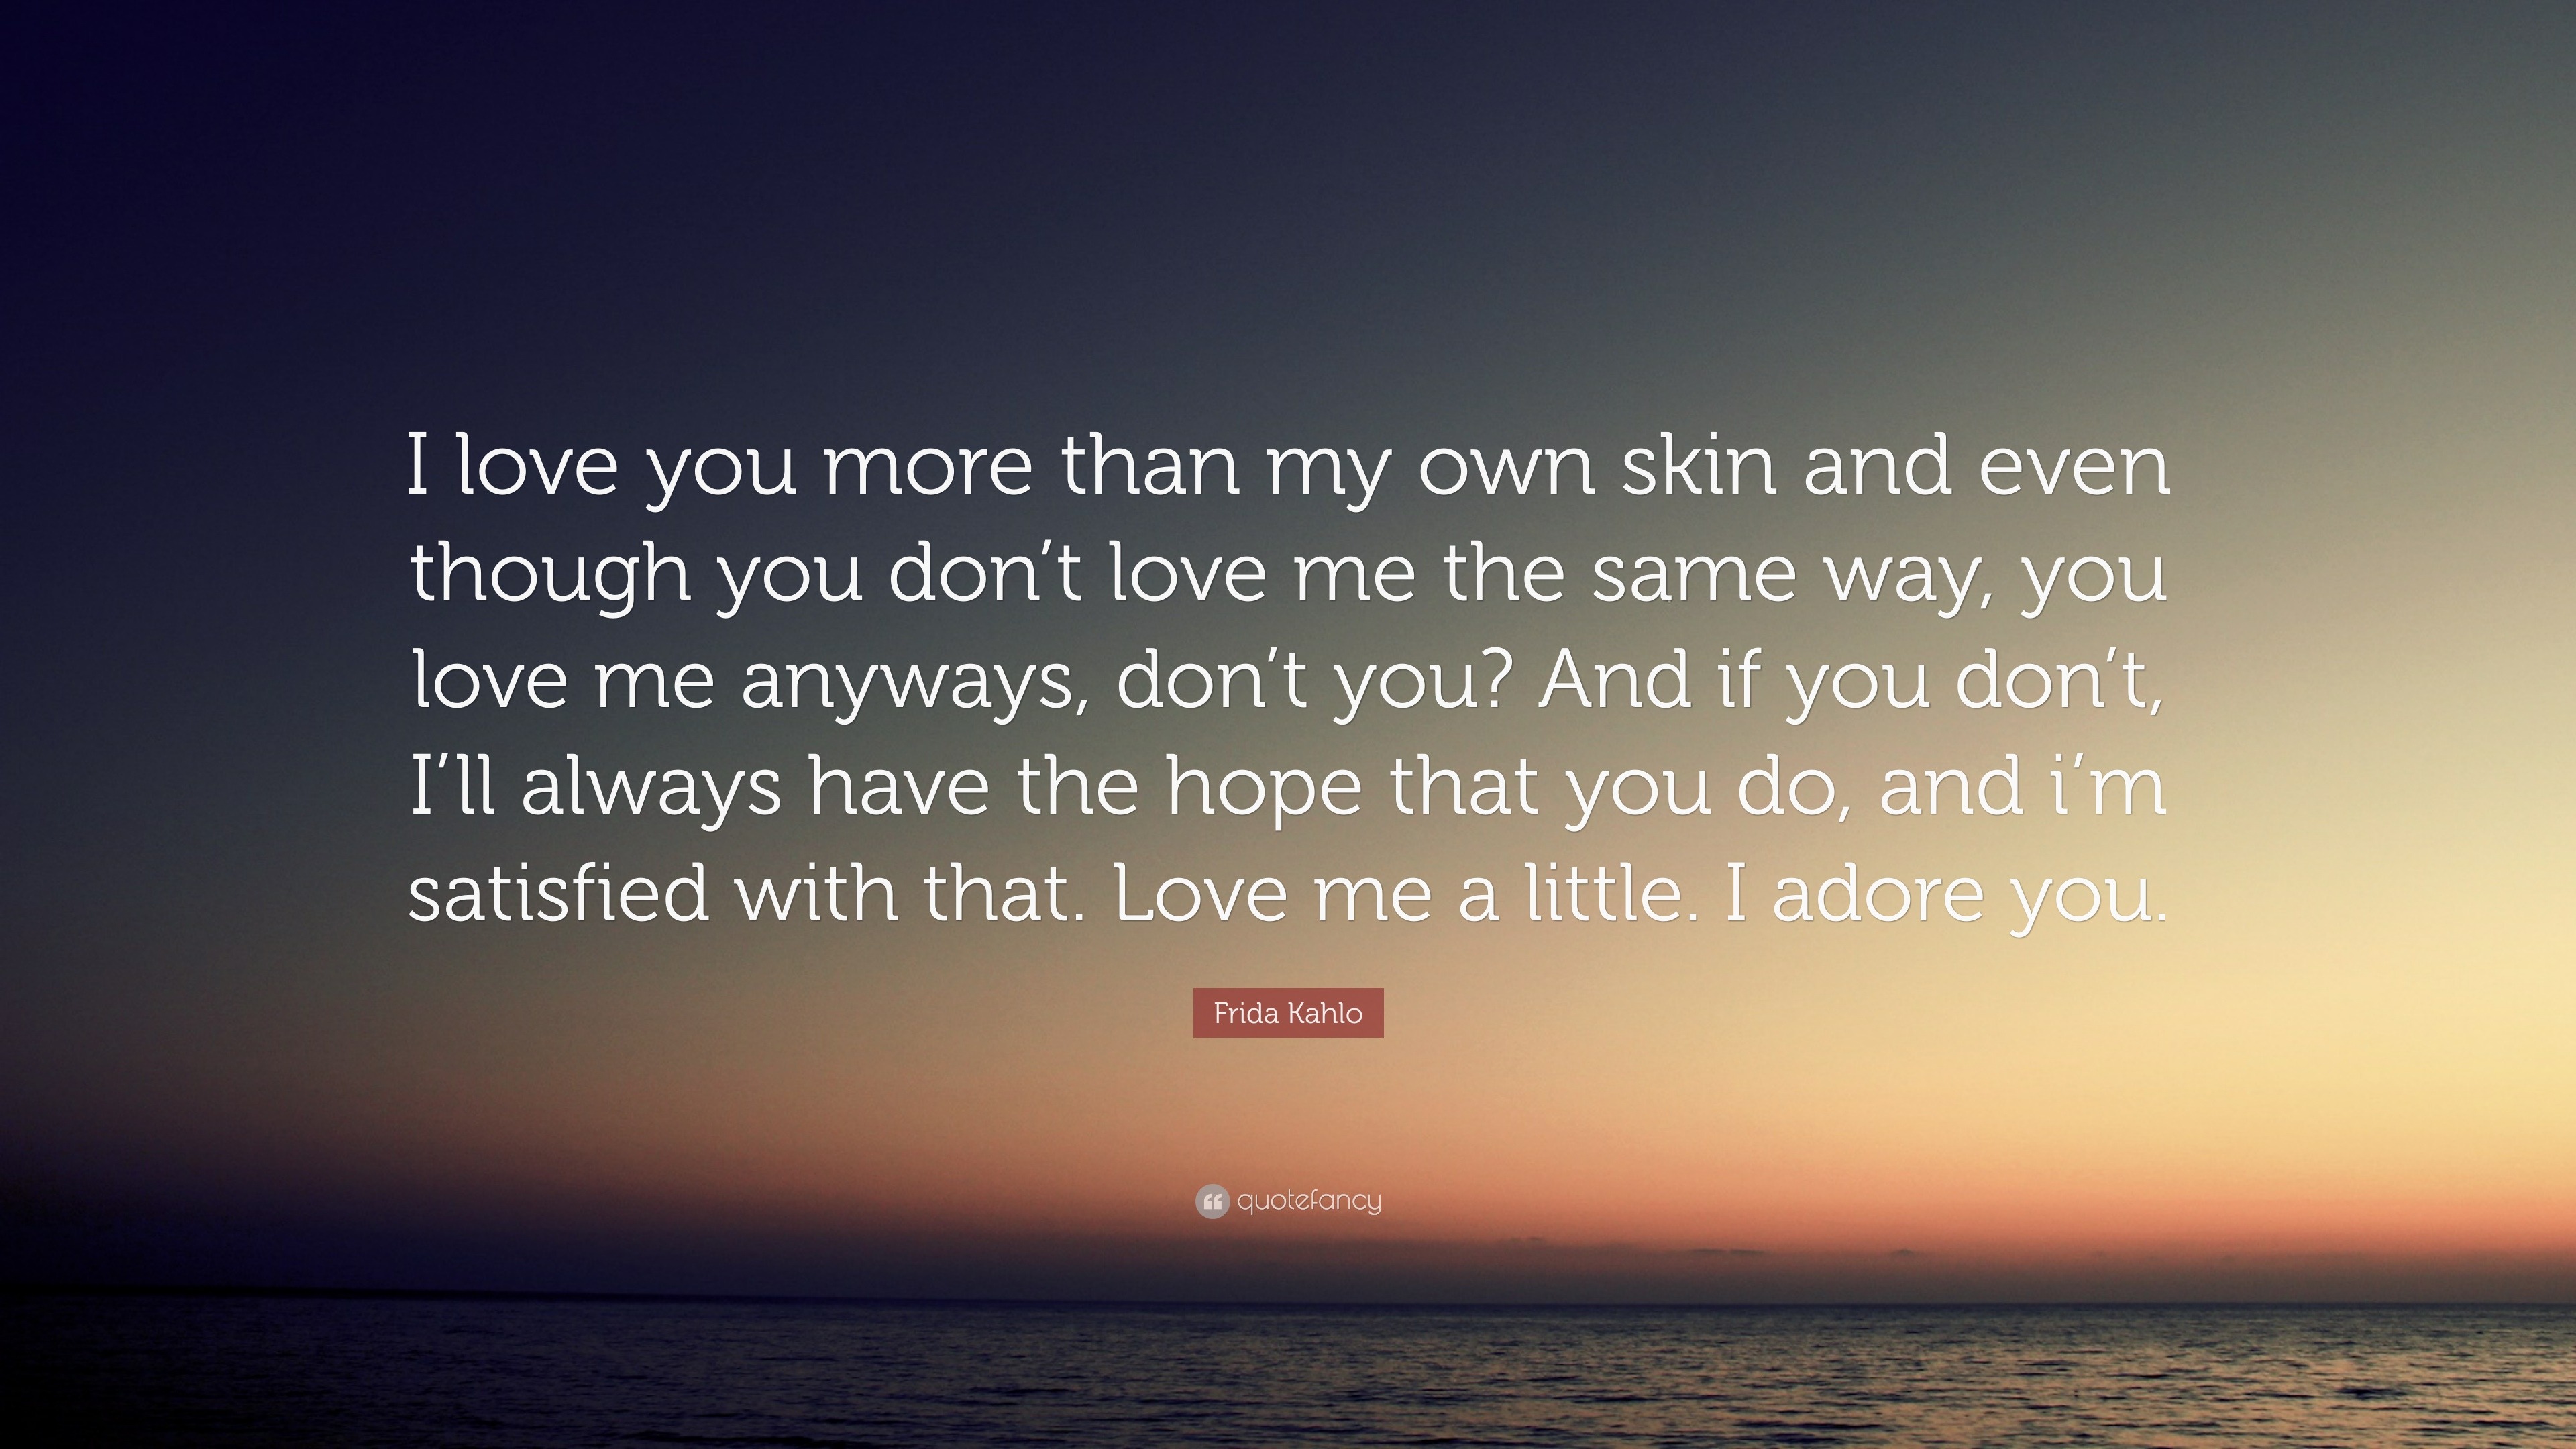 Frida Kahlo Quote “I love you more than my own skin and even though